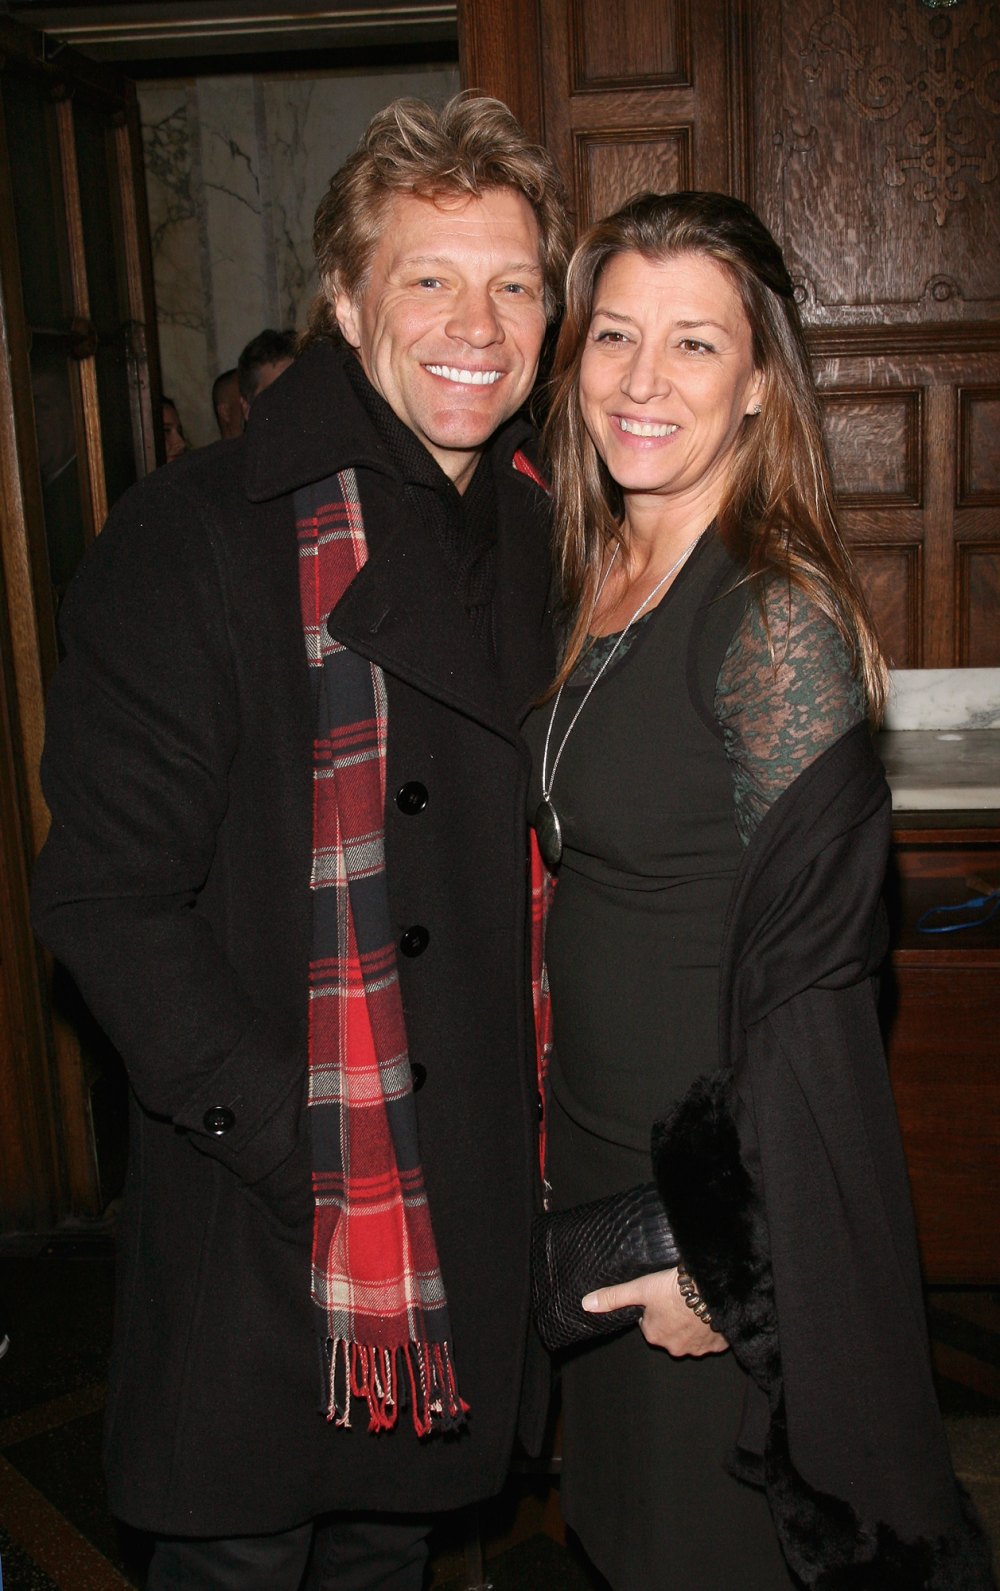 Honest quotes from Jon Bon Jovi about his marriage to Dorothea Hurley